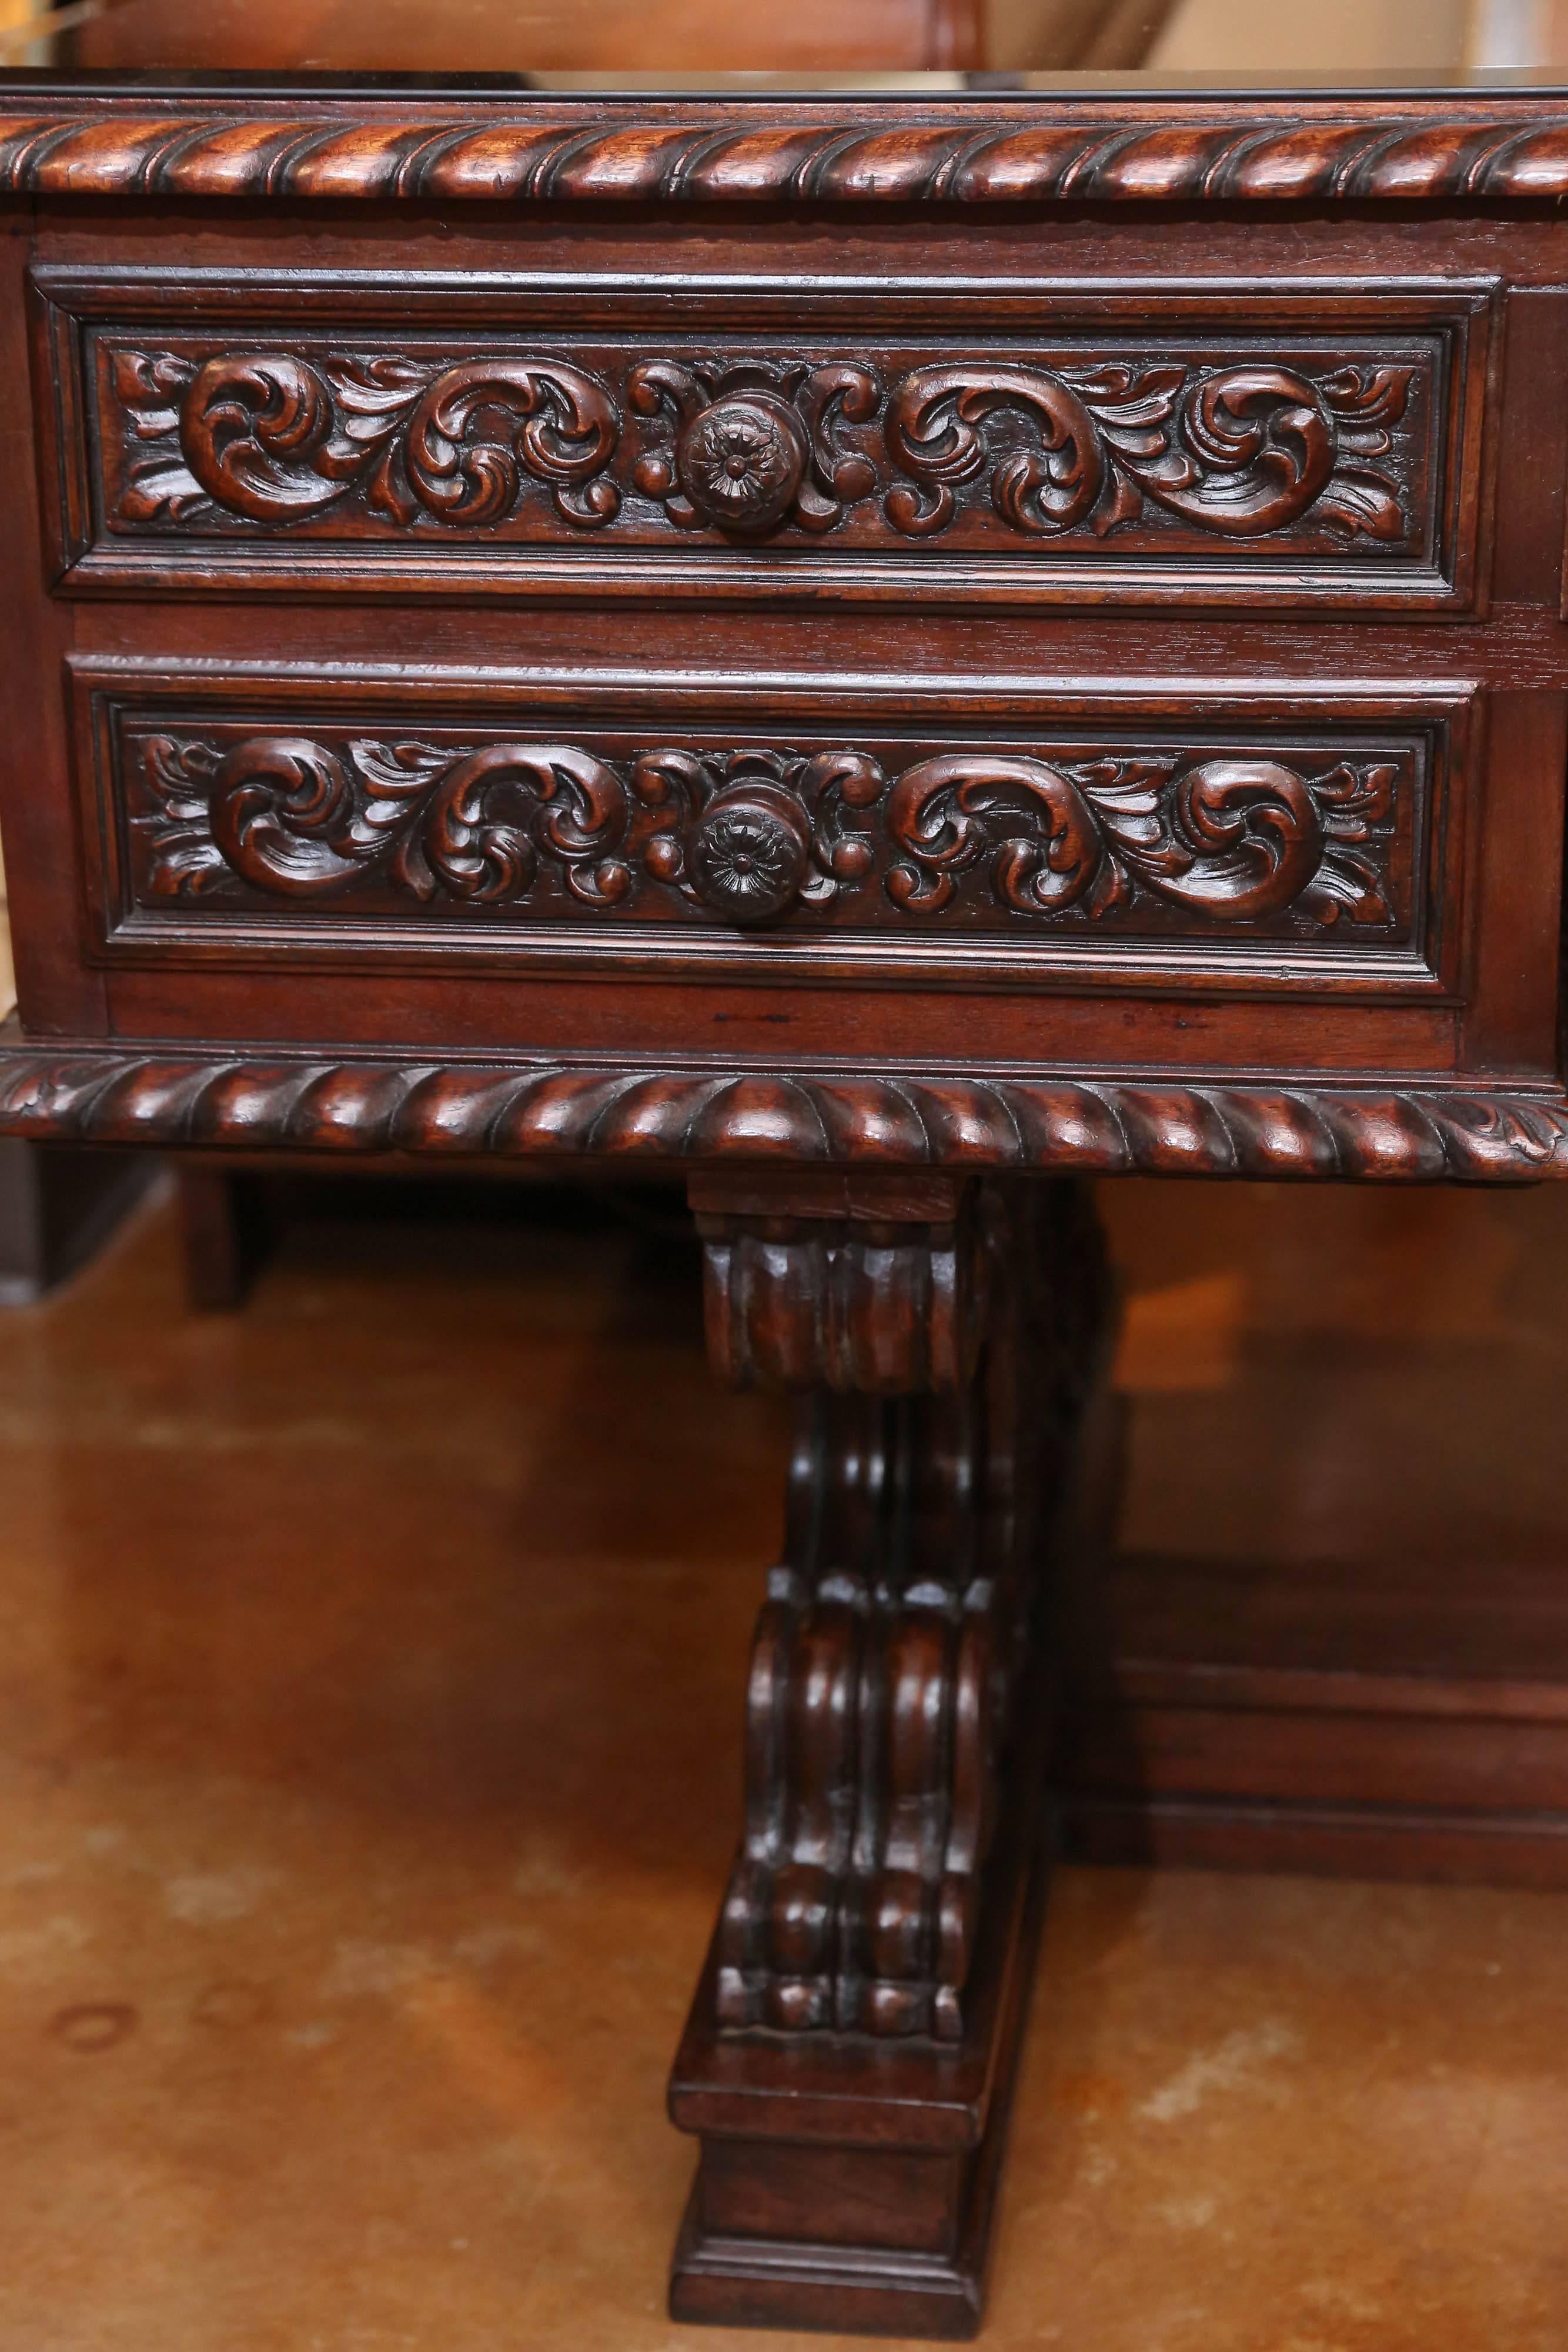 Incredible carved wood desk in a rich mahogany, carved on all sides so
That it could be viewed from all directions. The drawers all slide easily
For a fully functional work place. A beveled glass top has been added
For making it resistant to